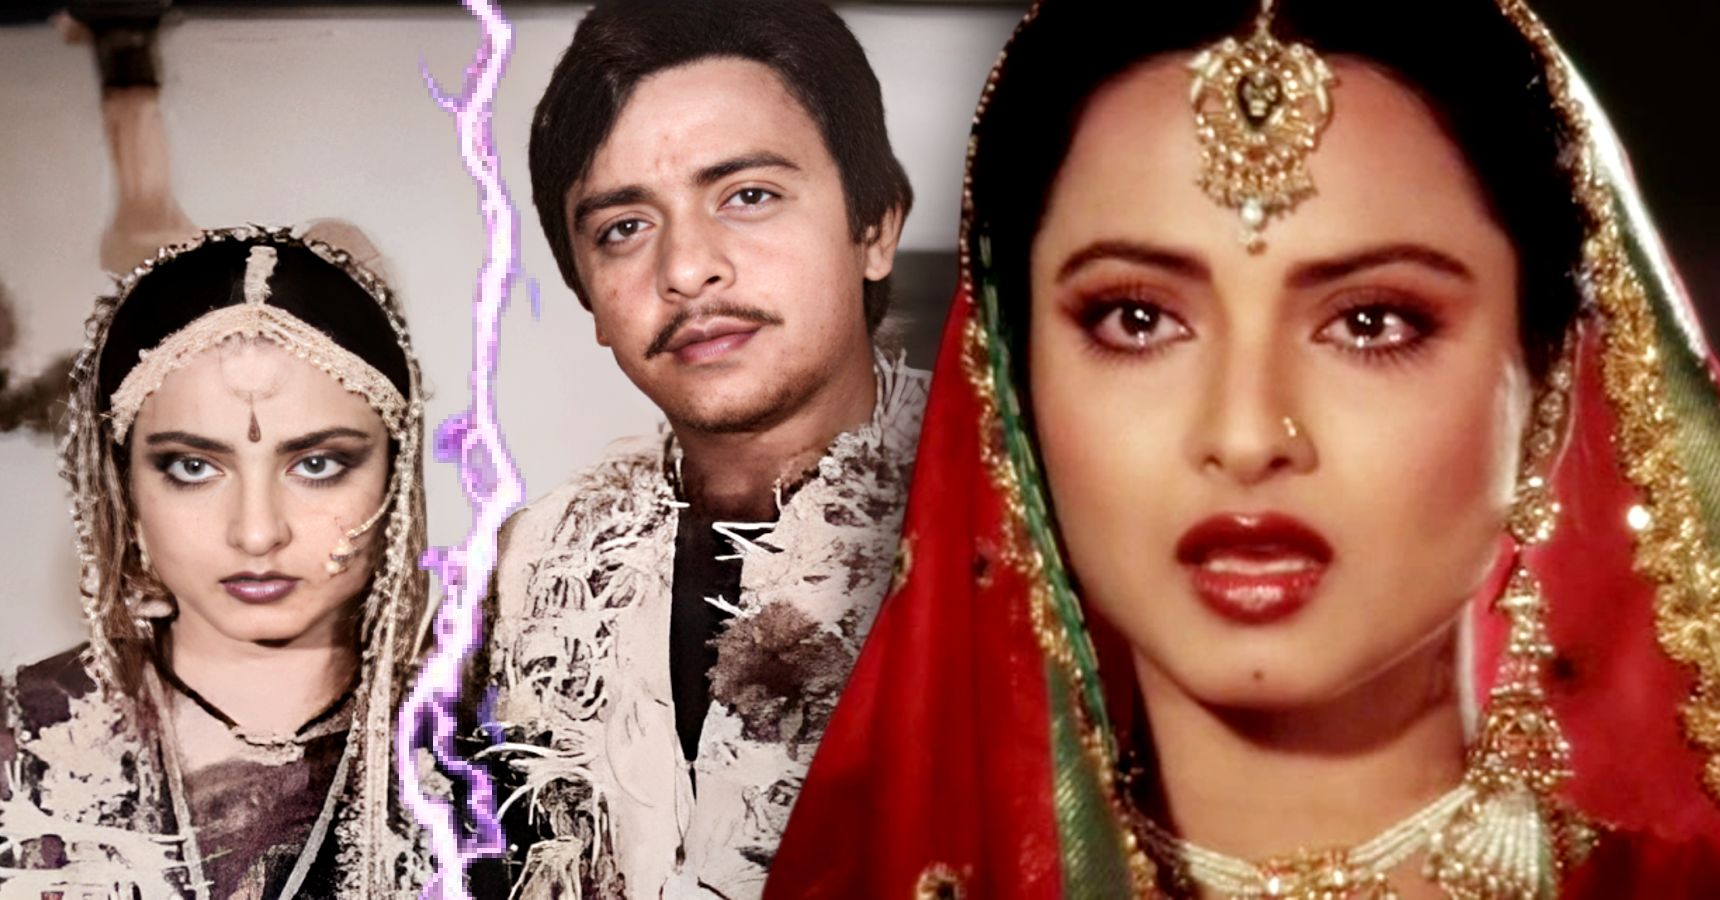 Bollywood actress Rekha married Vinod Mehra, actor’s mother wanted to beat actress with her shoe